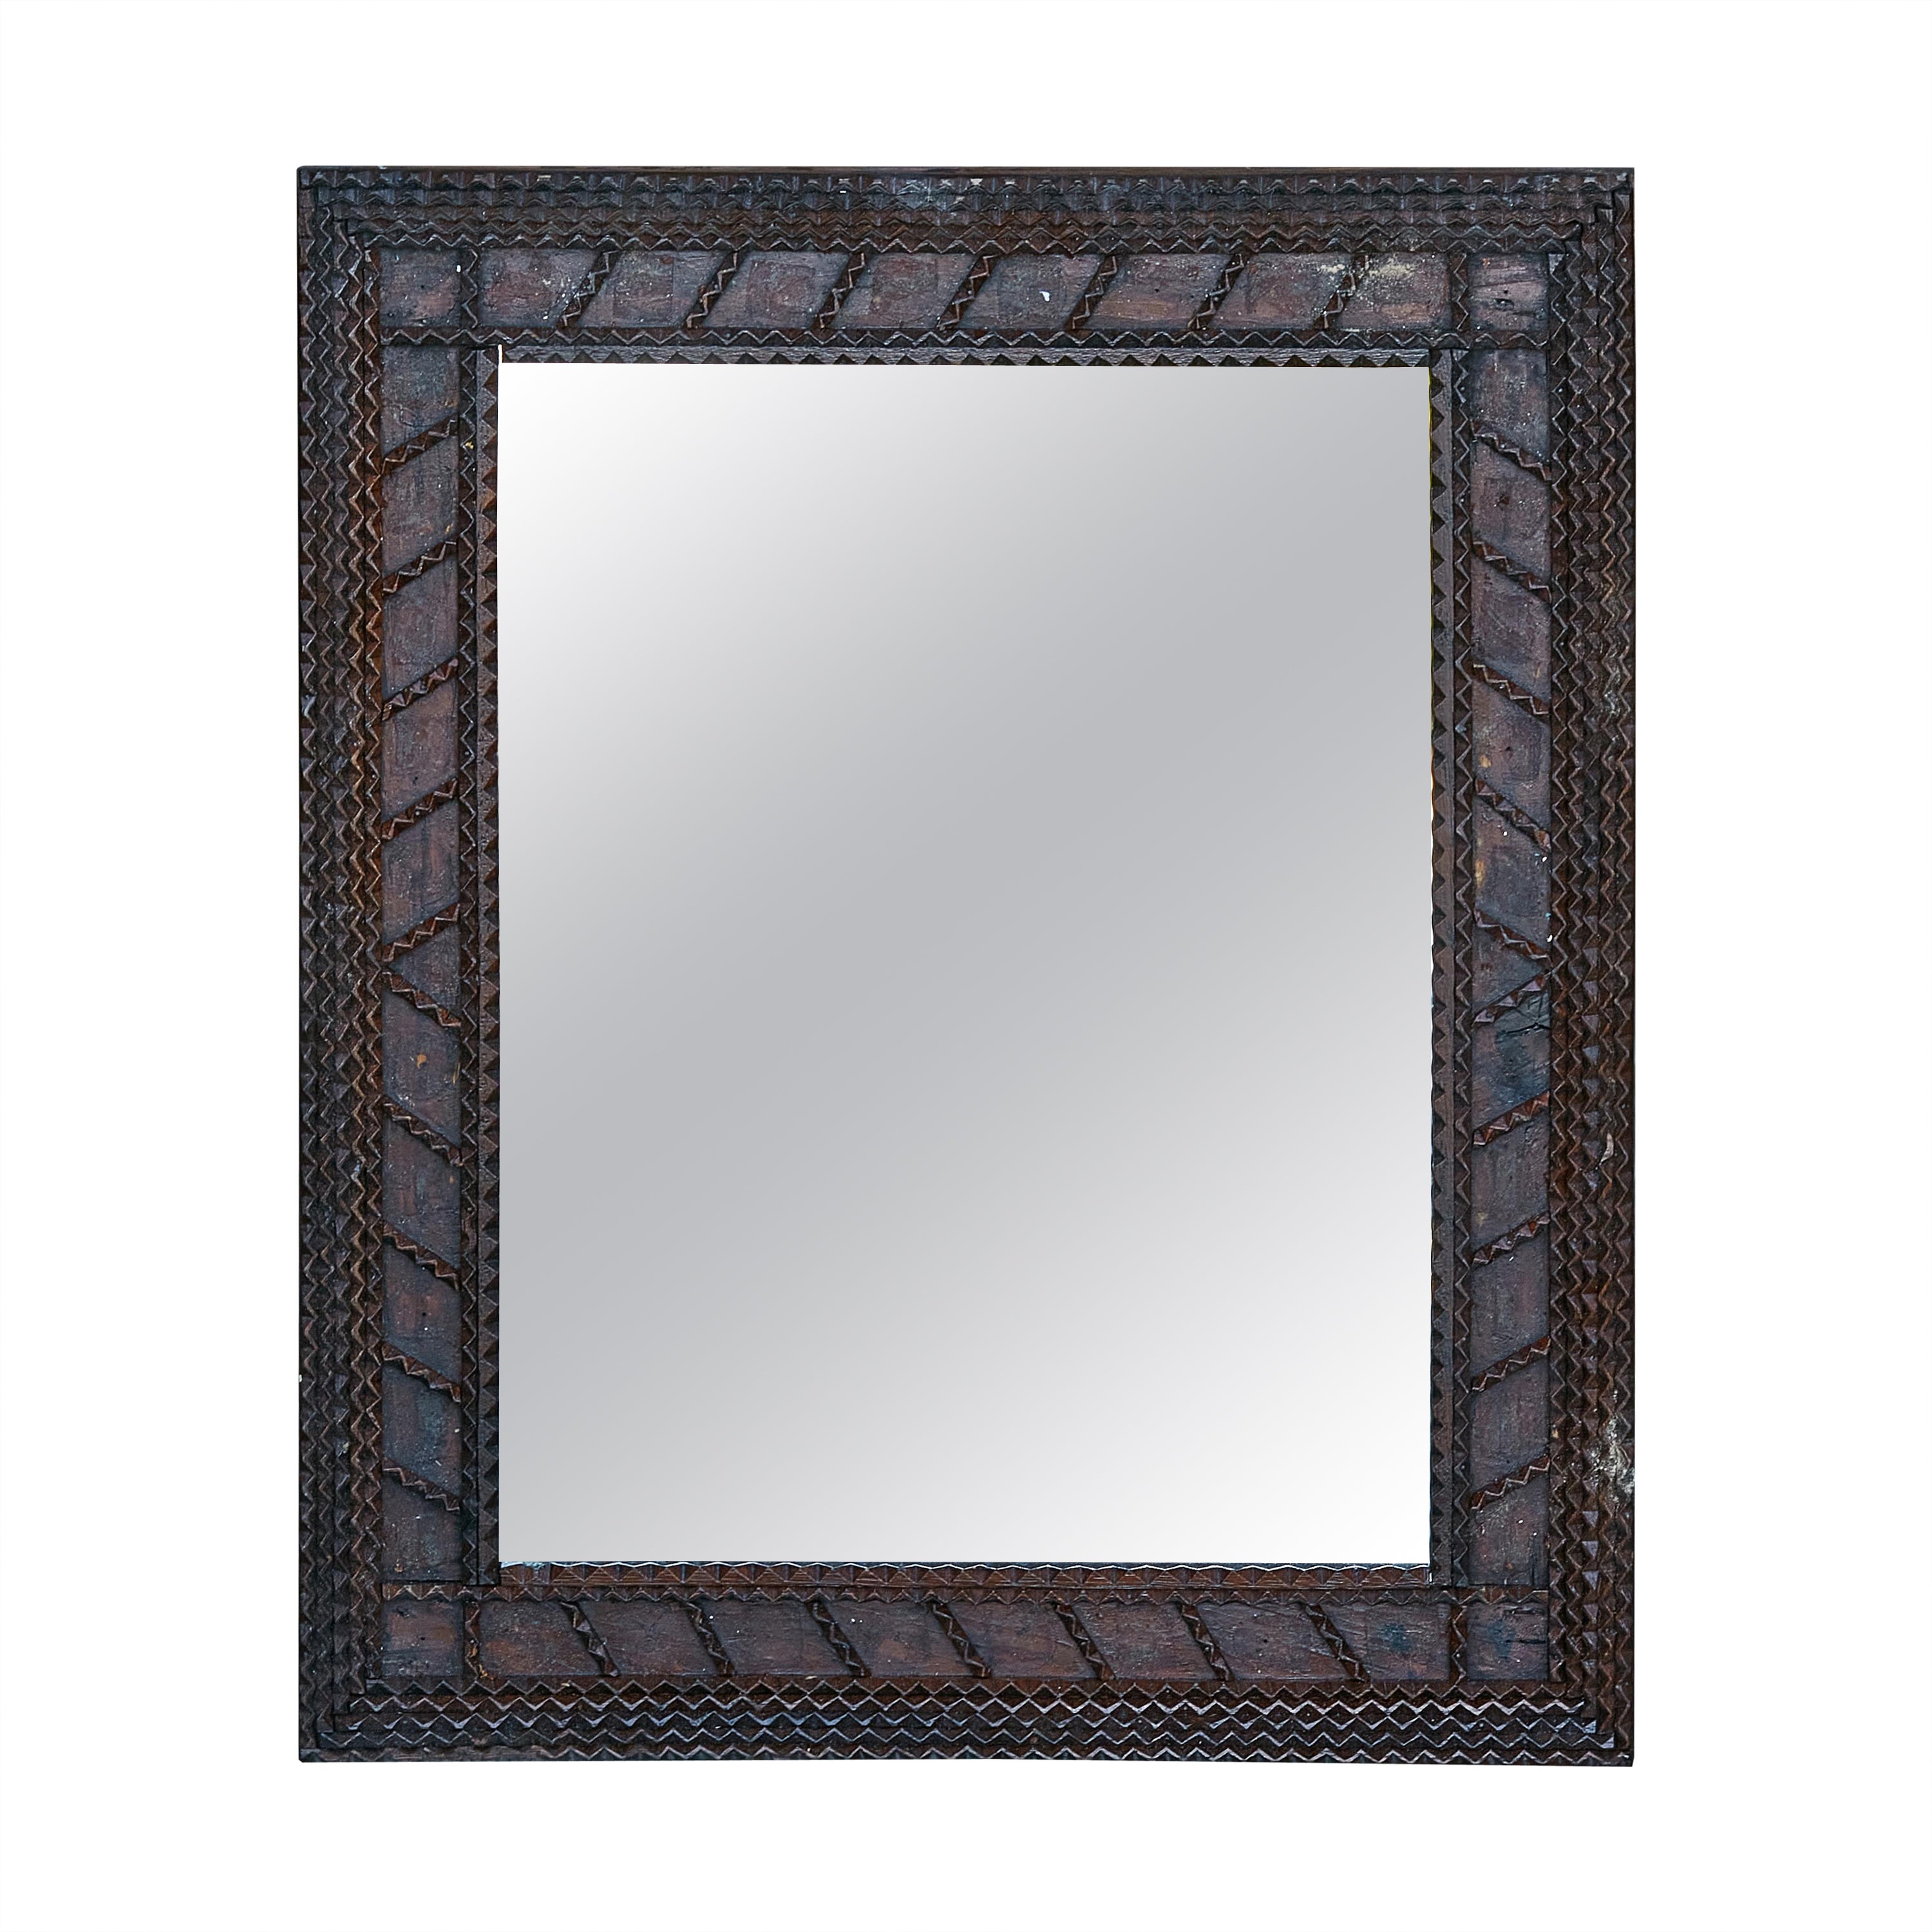 Small French Tramp Art Turn of the Century Mirror with Wavy Patterns, circa 1900 For Sale